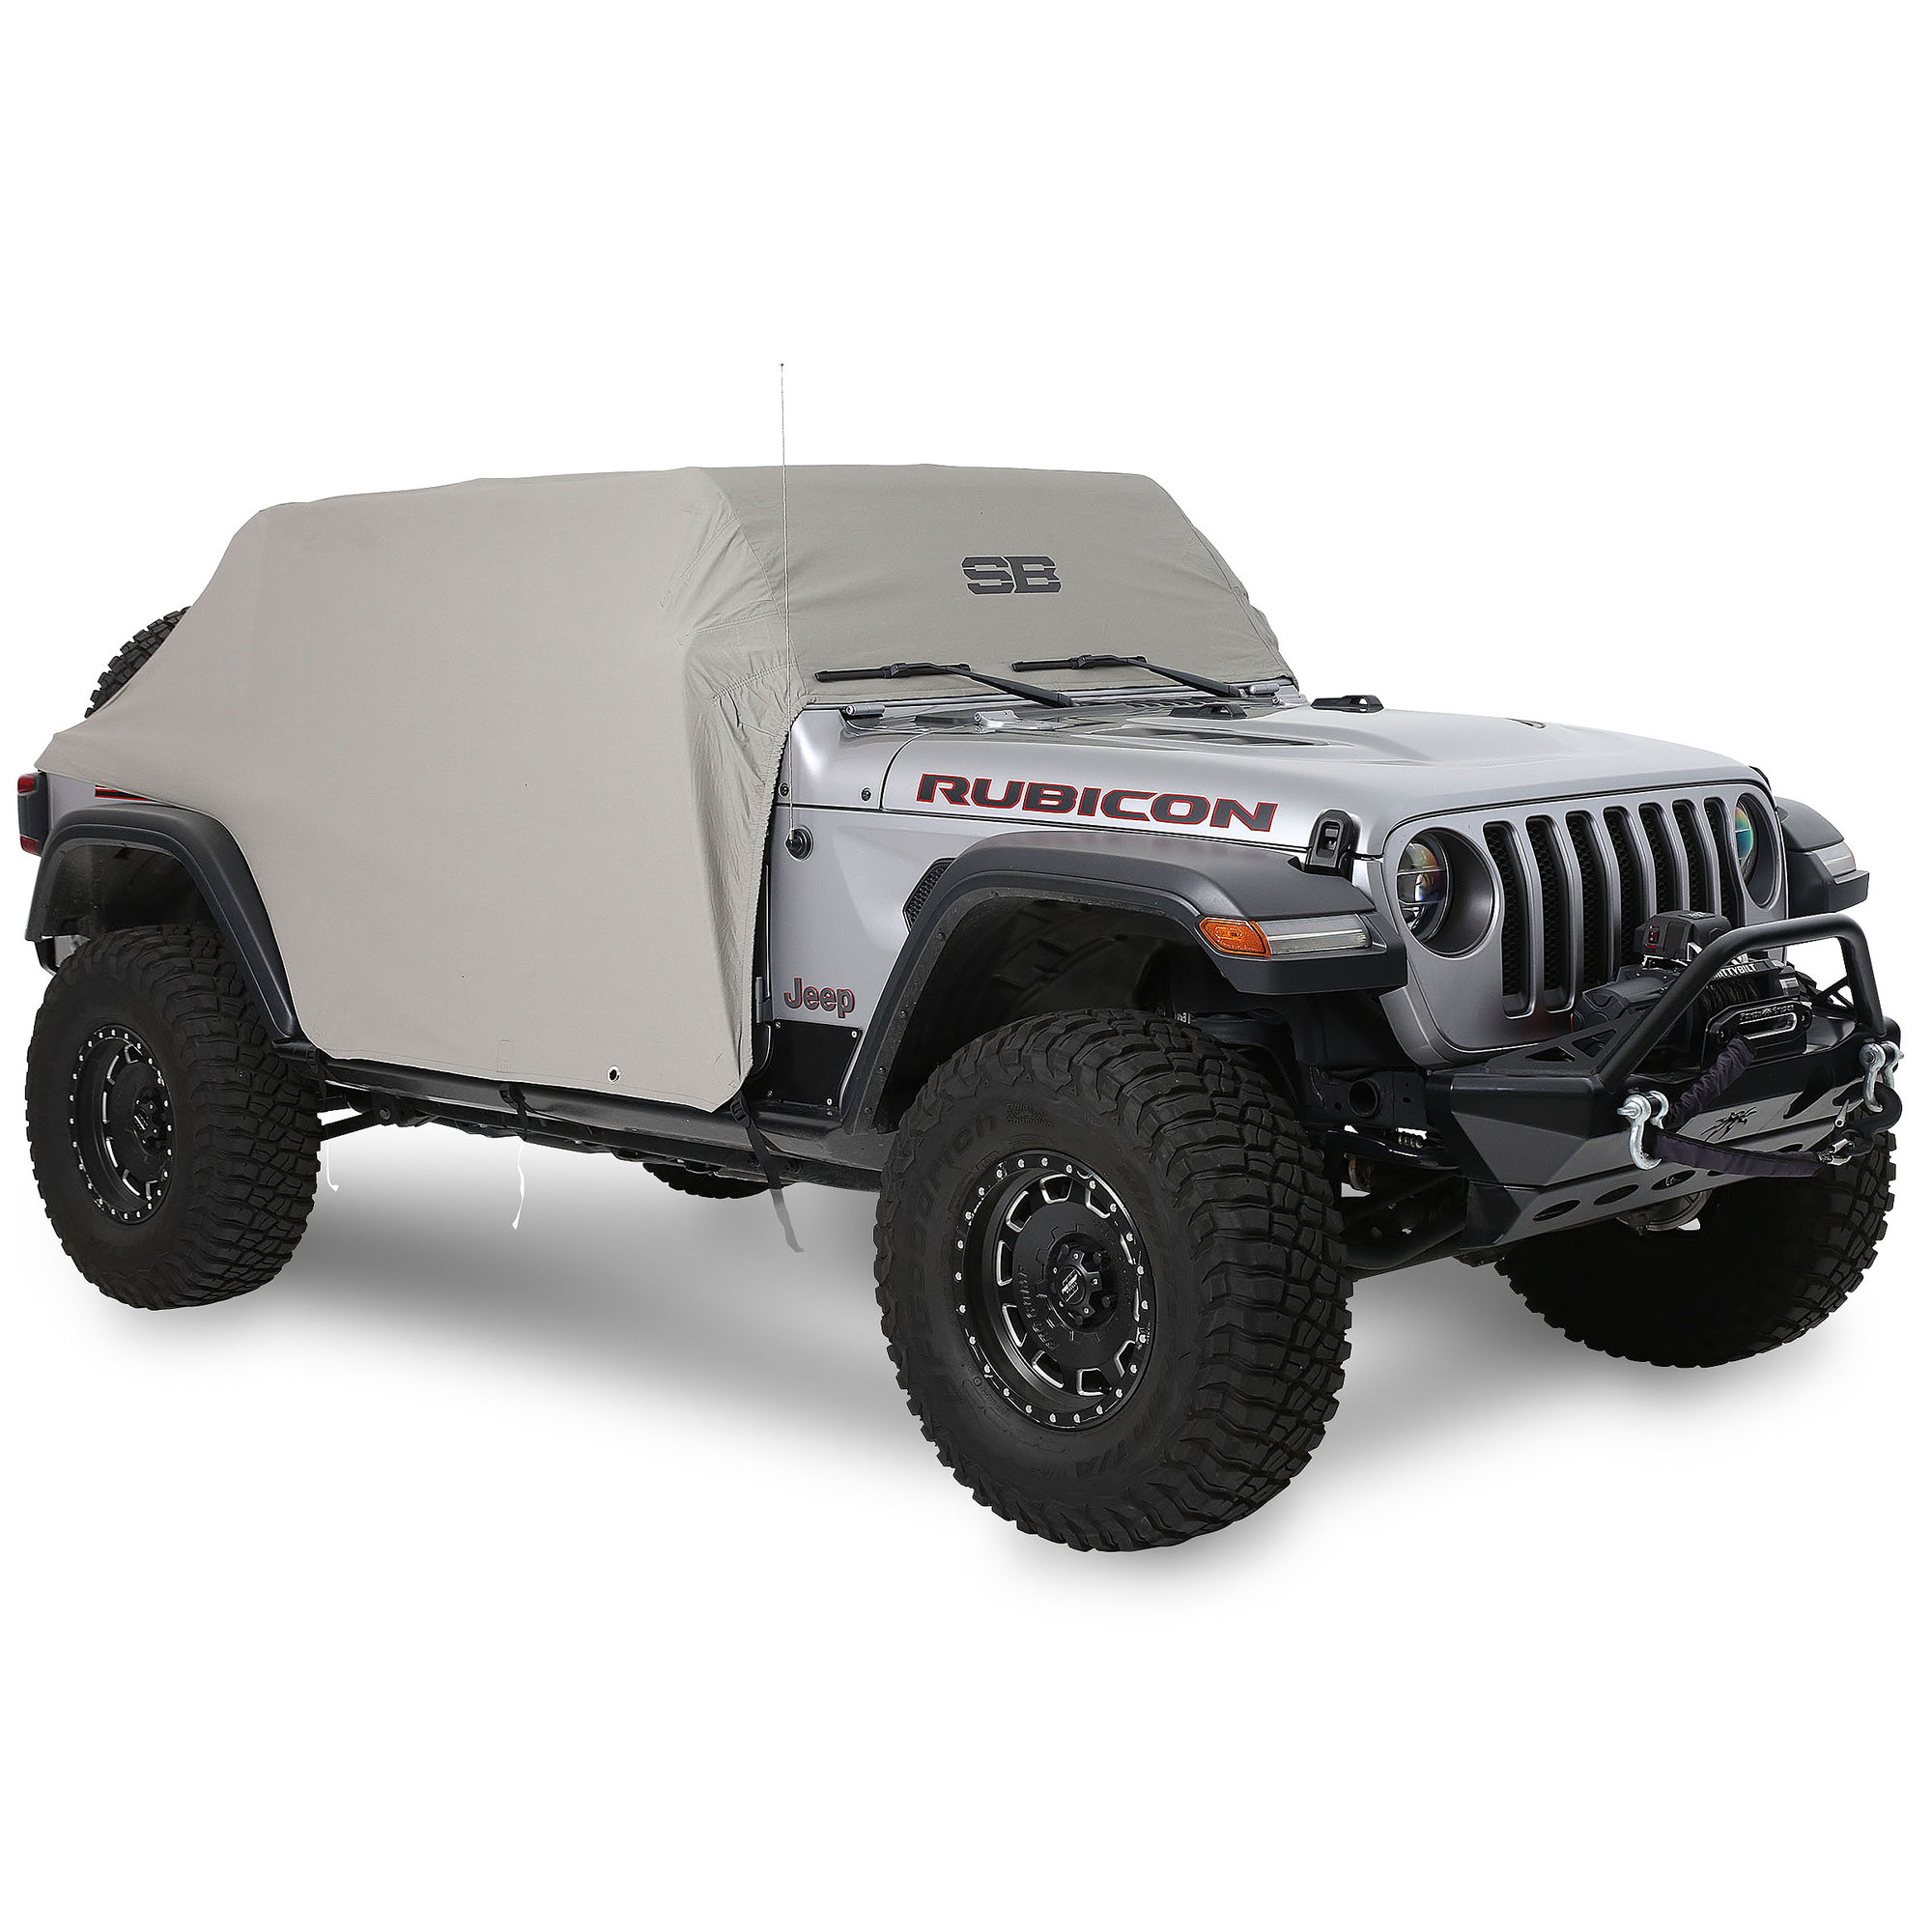 Smittybilt 1071 Cab Cover for 18-23 Jeep Wrangler JL Unlimited | Quadratec